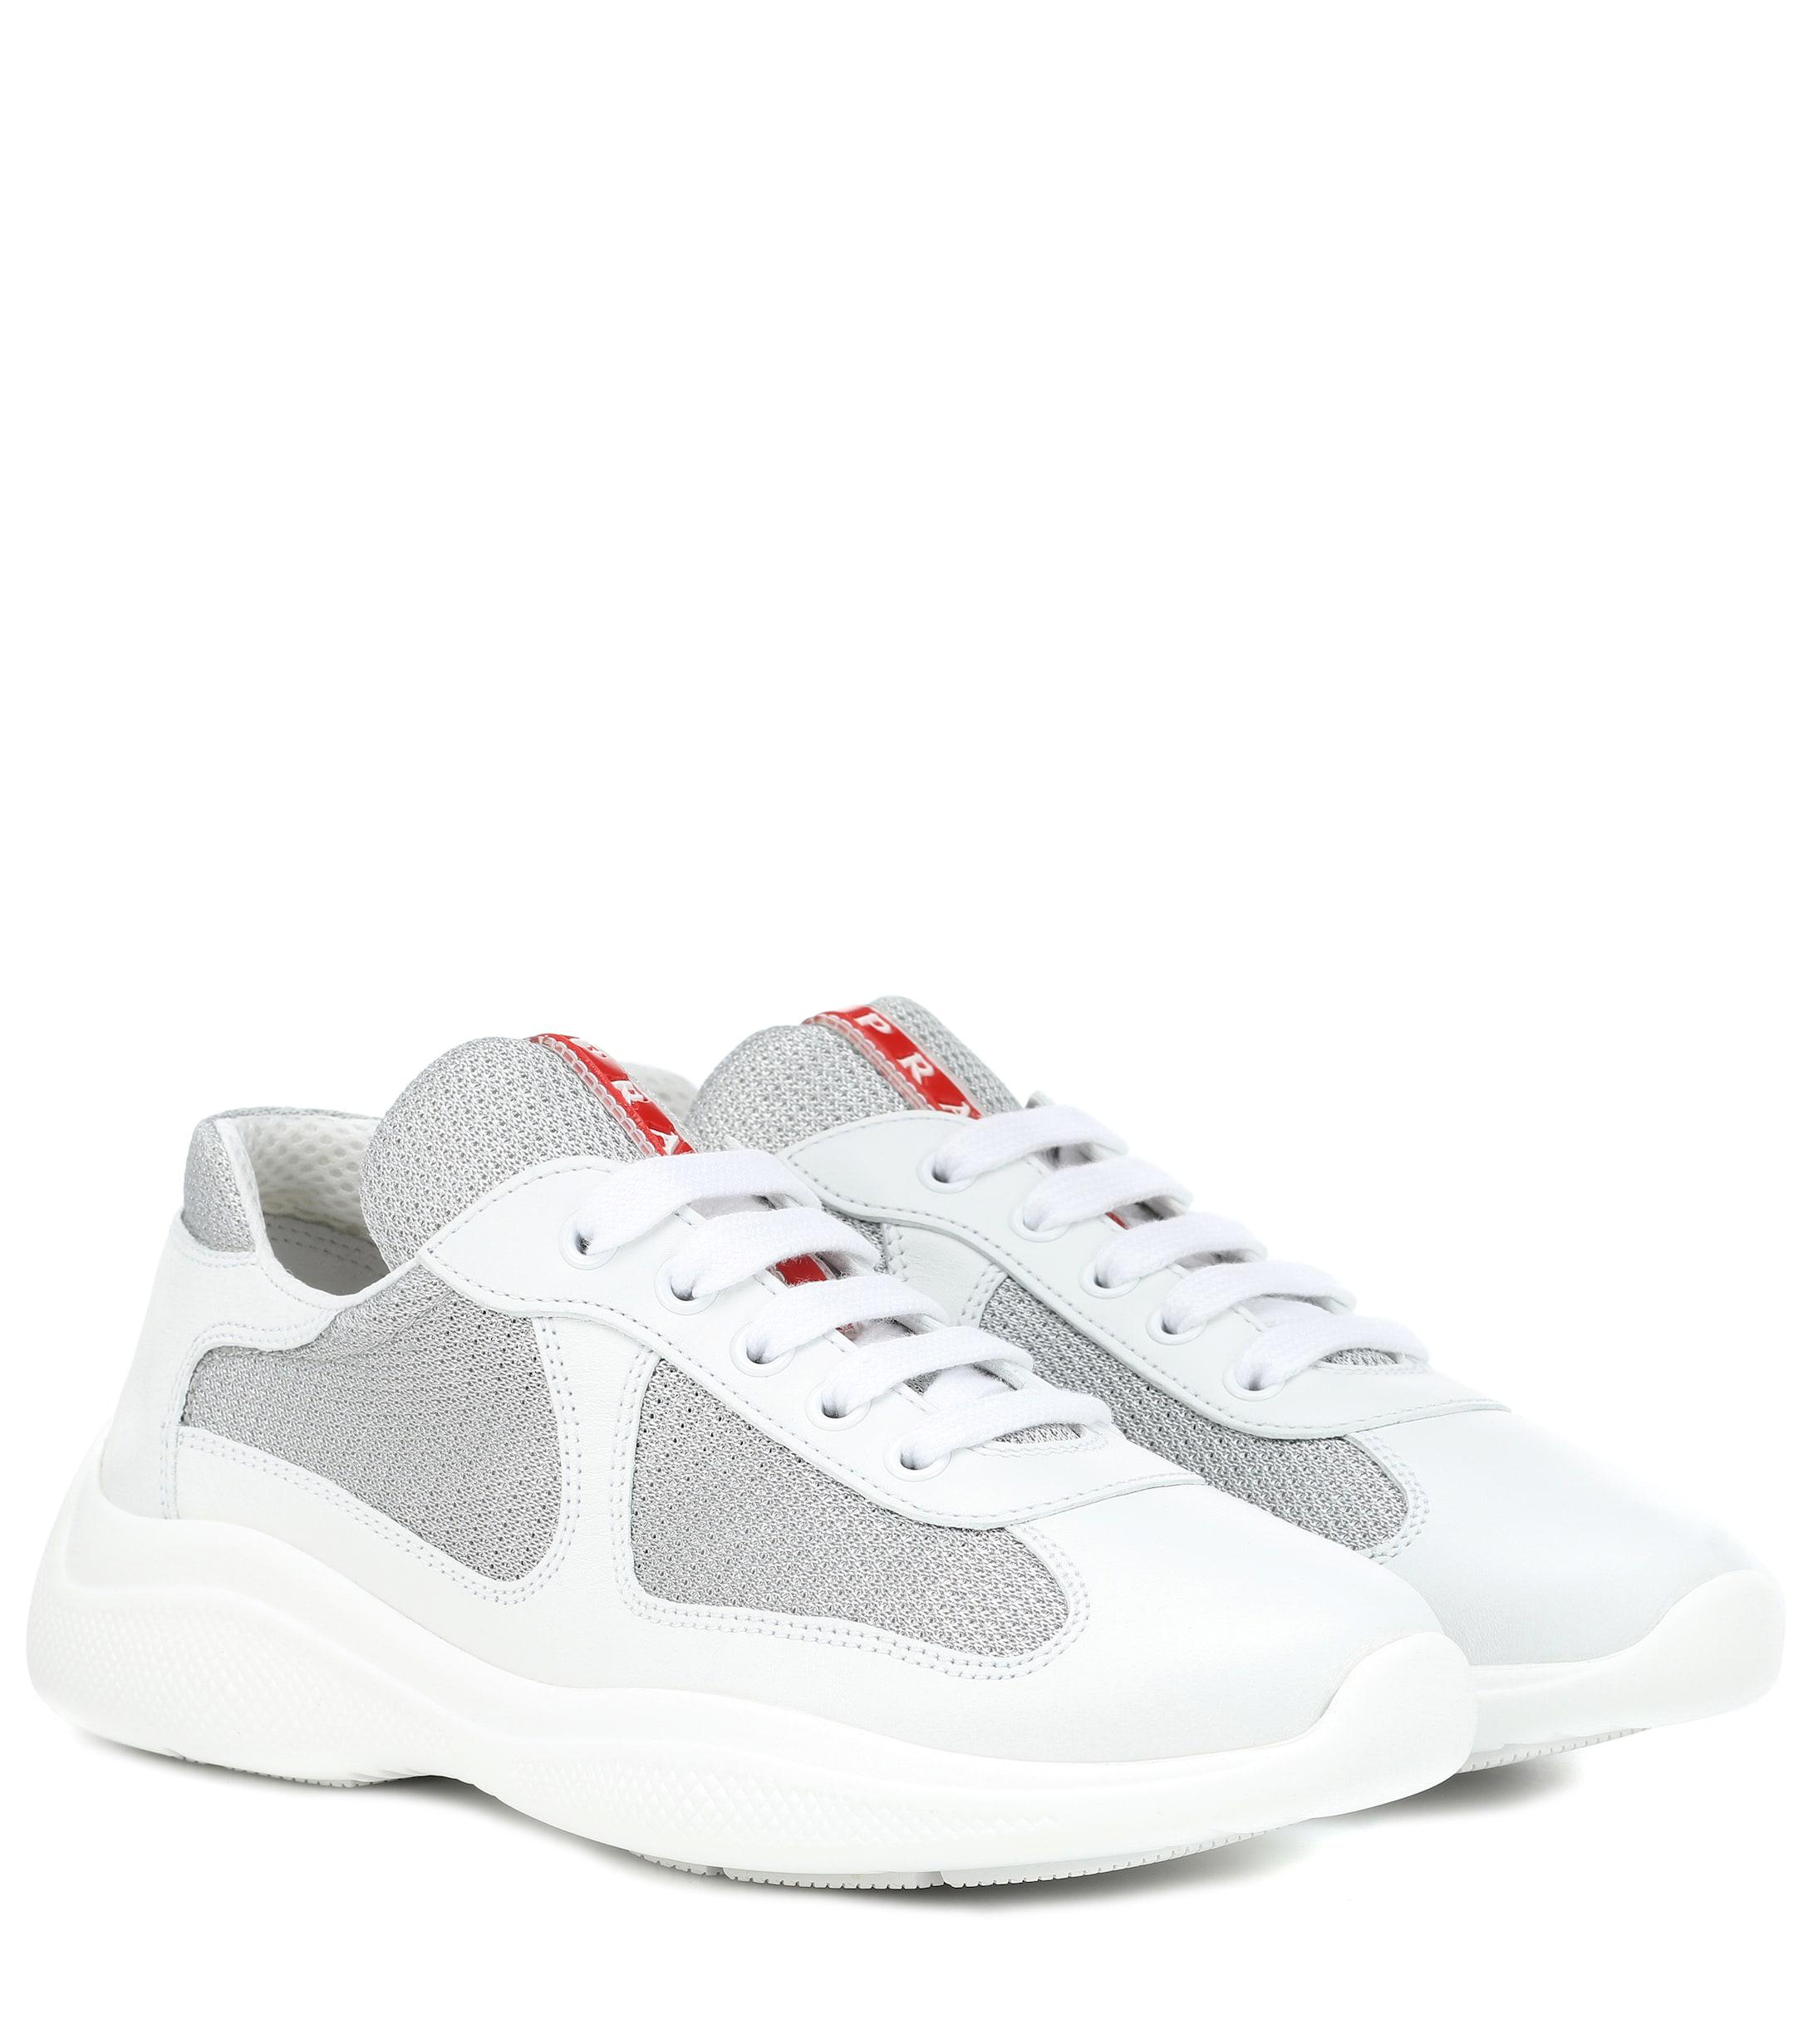 Prada Leather America Cup Sneakers in White/Silver (White) - Lyst